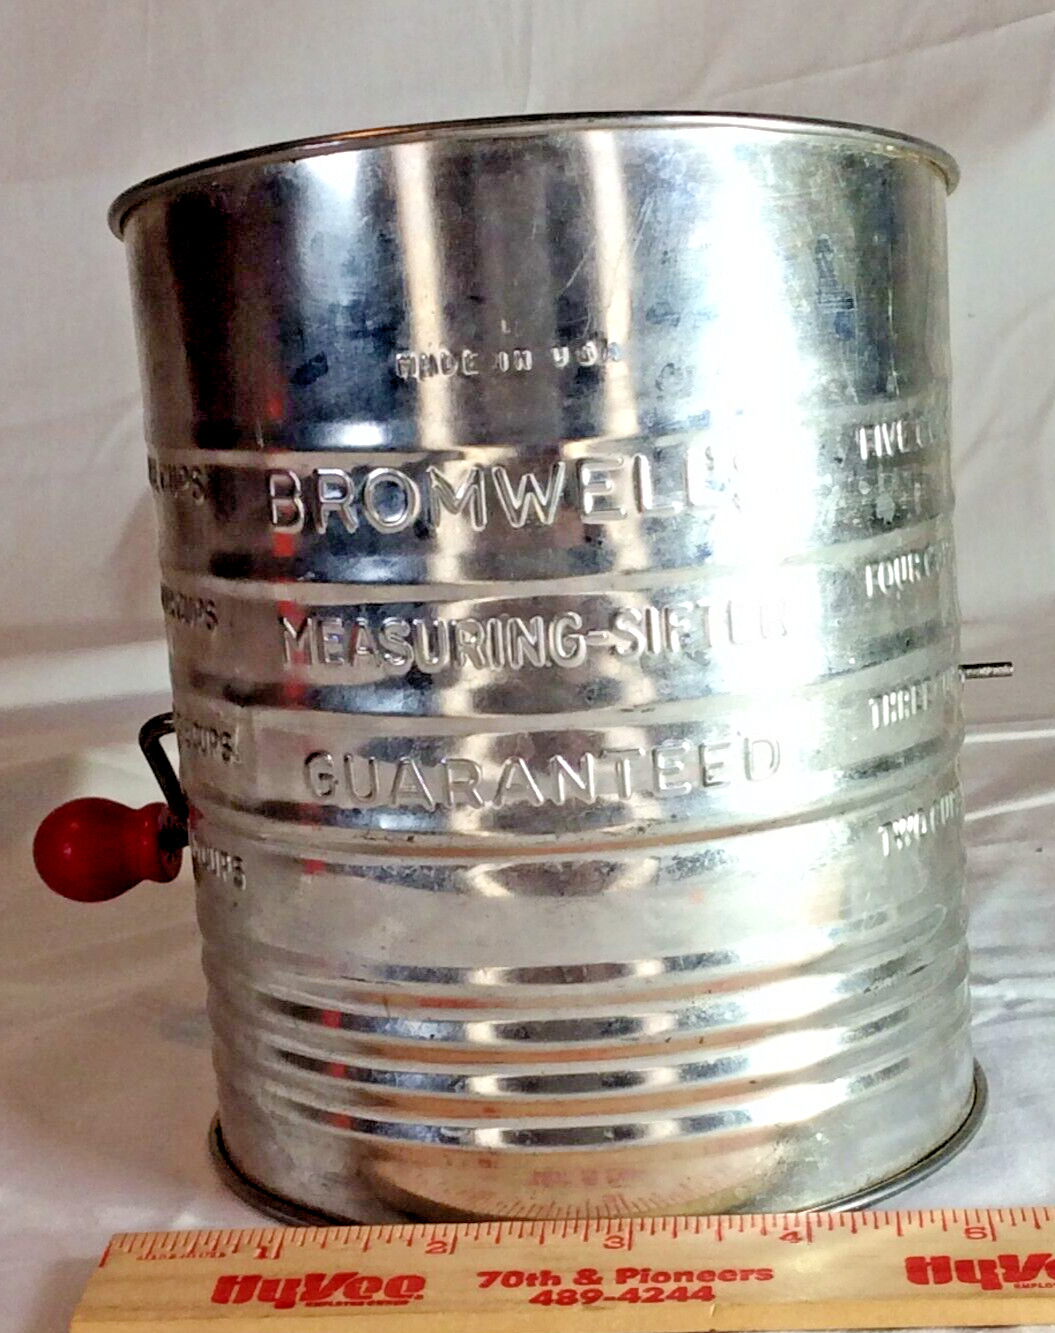 Bromwell's MEASURING SIFTER (Vintage) Wood Handle MADE IN USA Patented METAL EUC